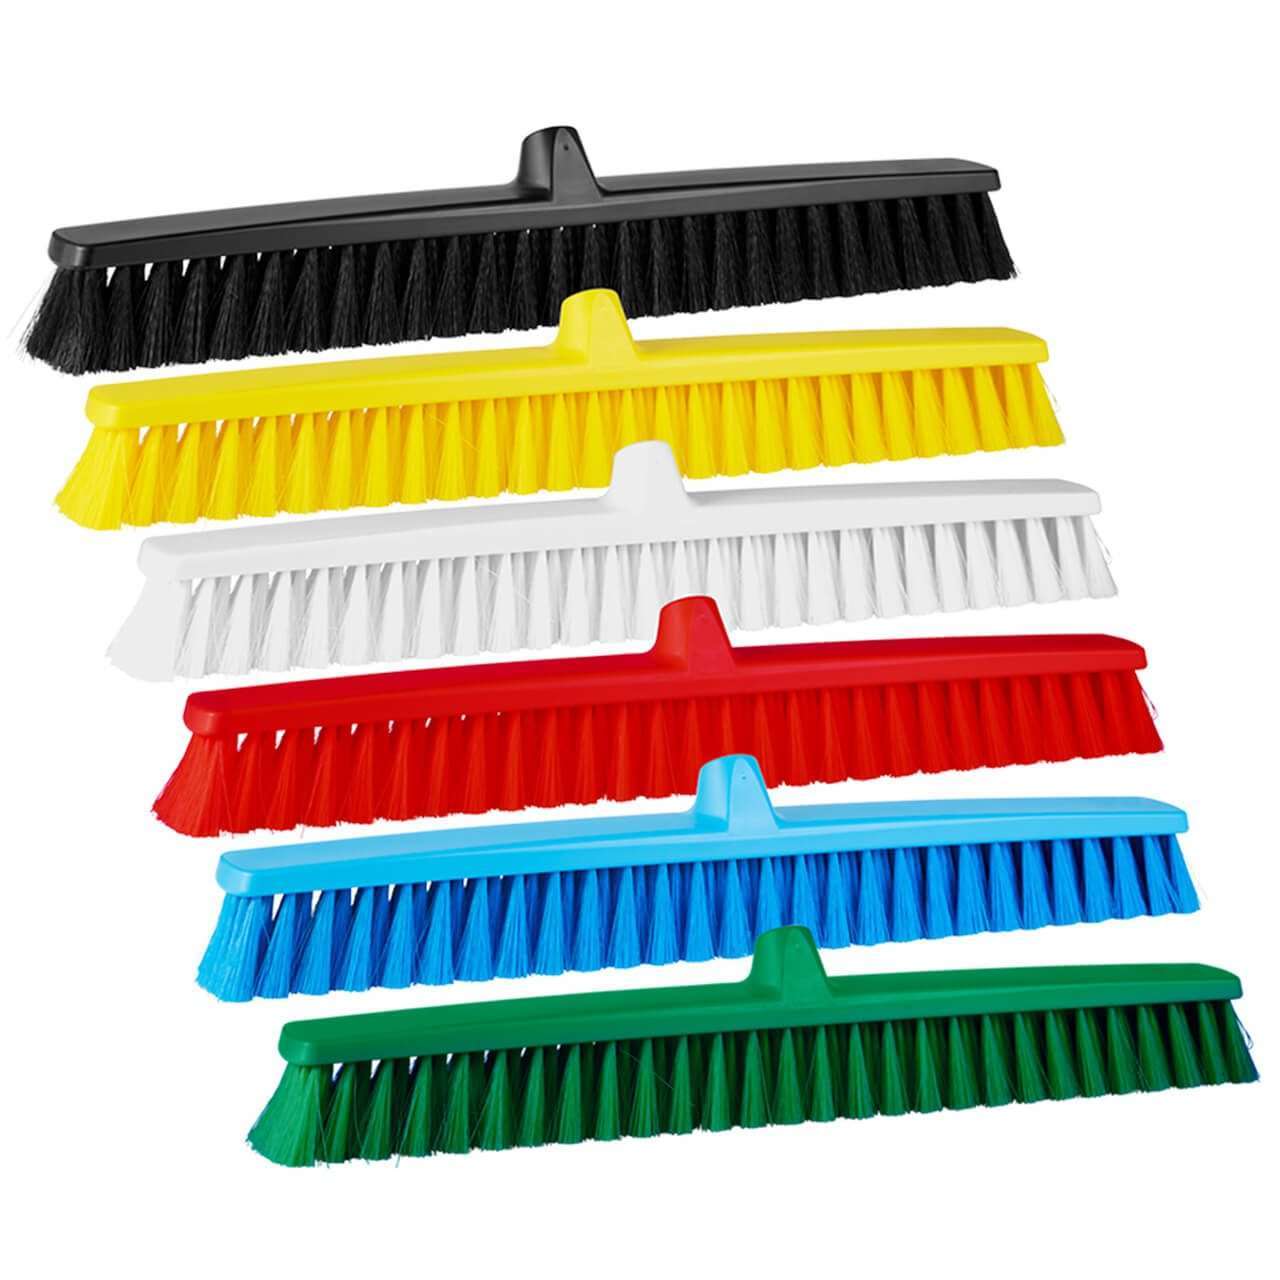 https://lean5sproducts.com/wp-content/uploads/2022/03/ColorCore-Soft-24%E2%80%B3-Push-Broom.jpg